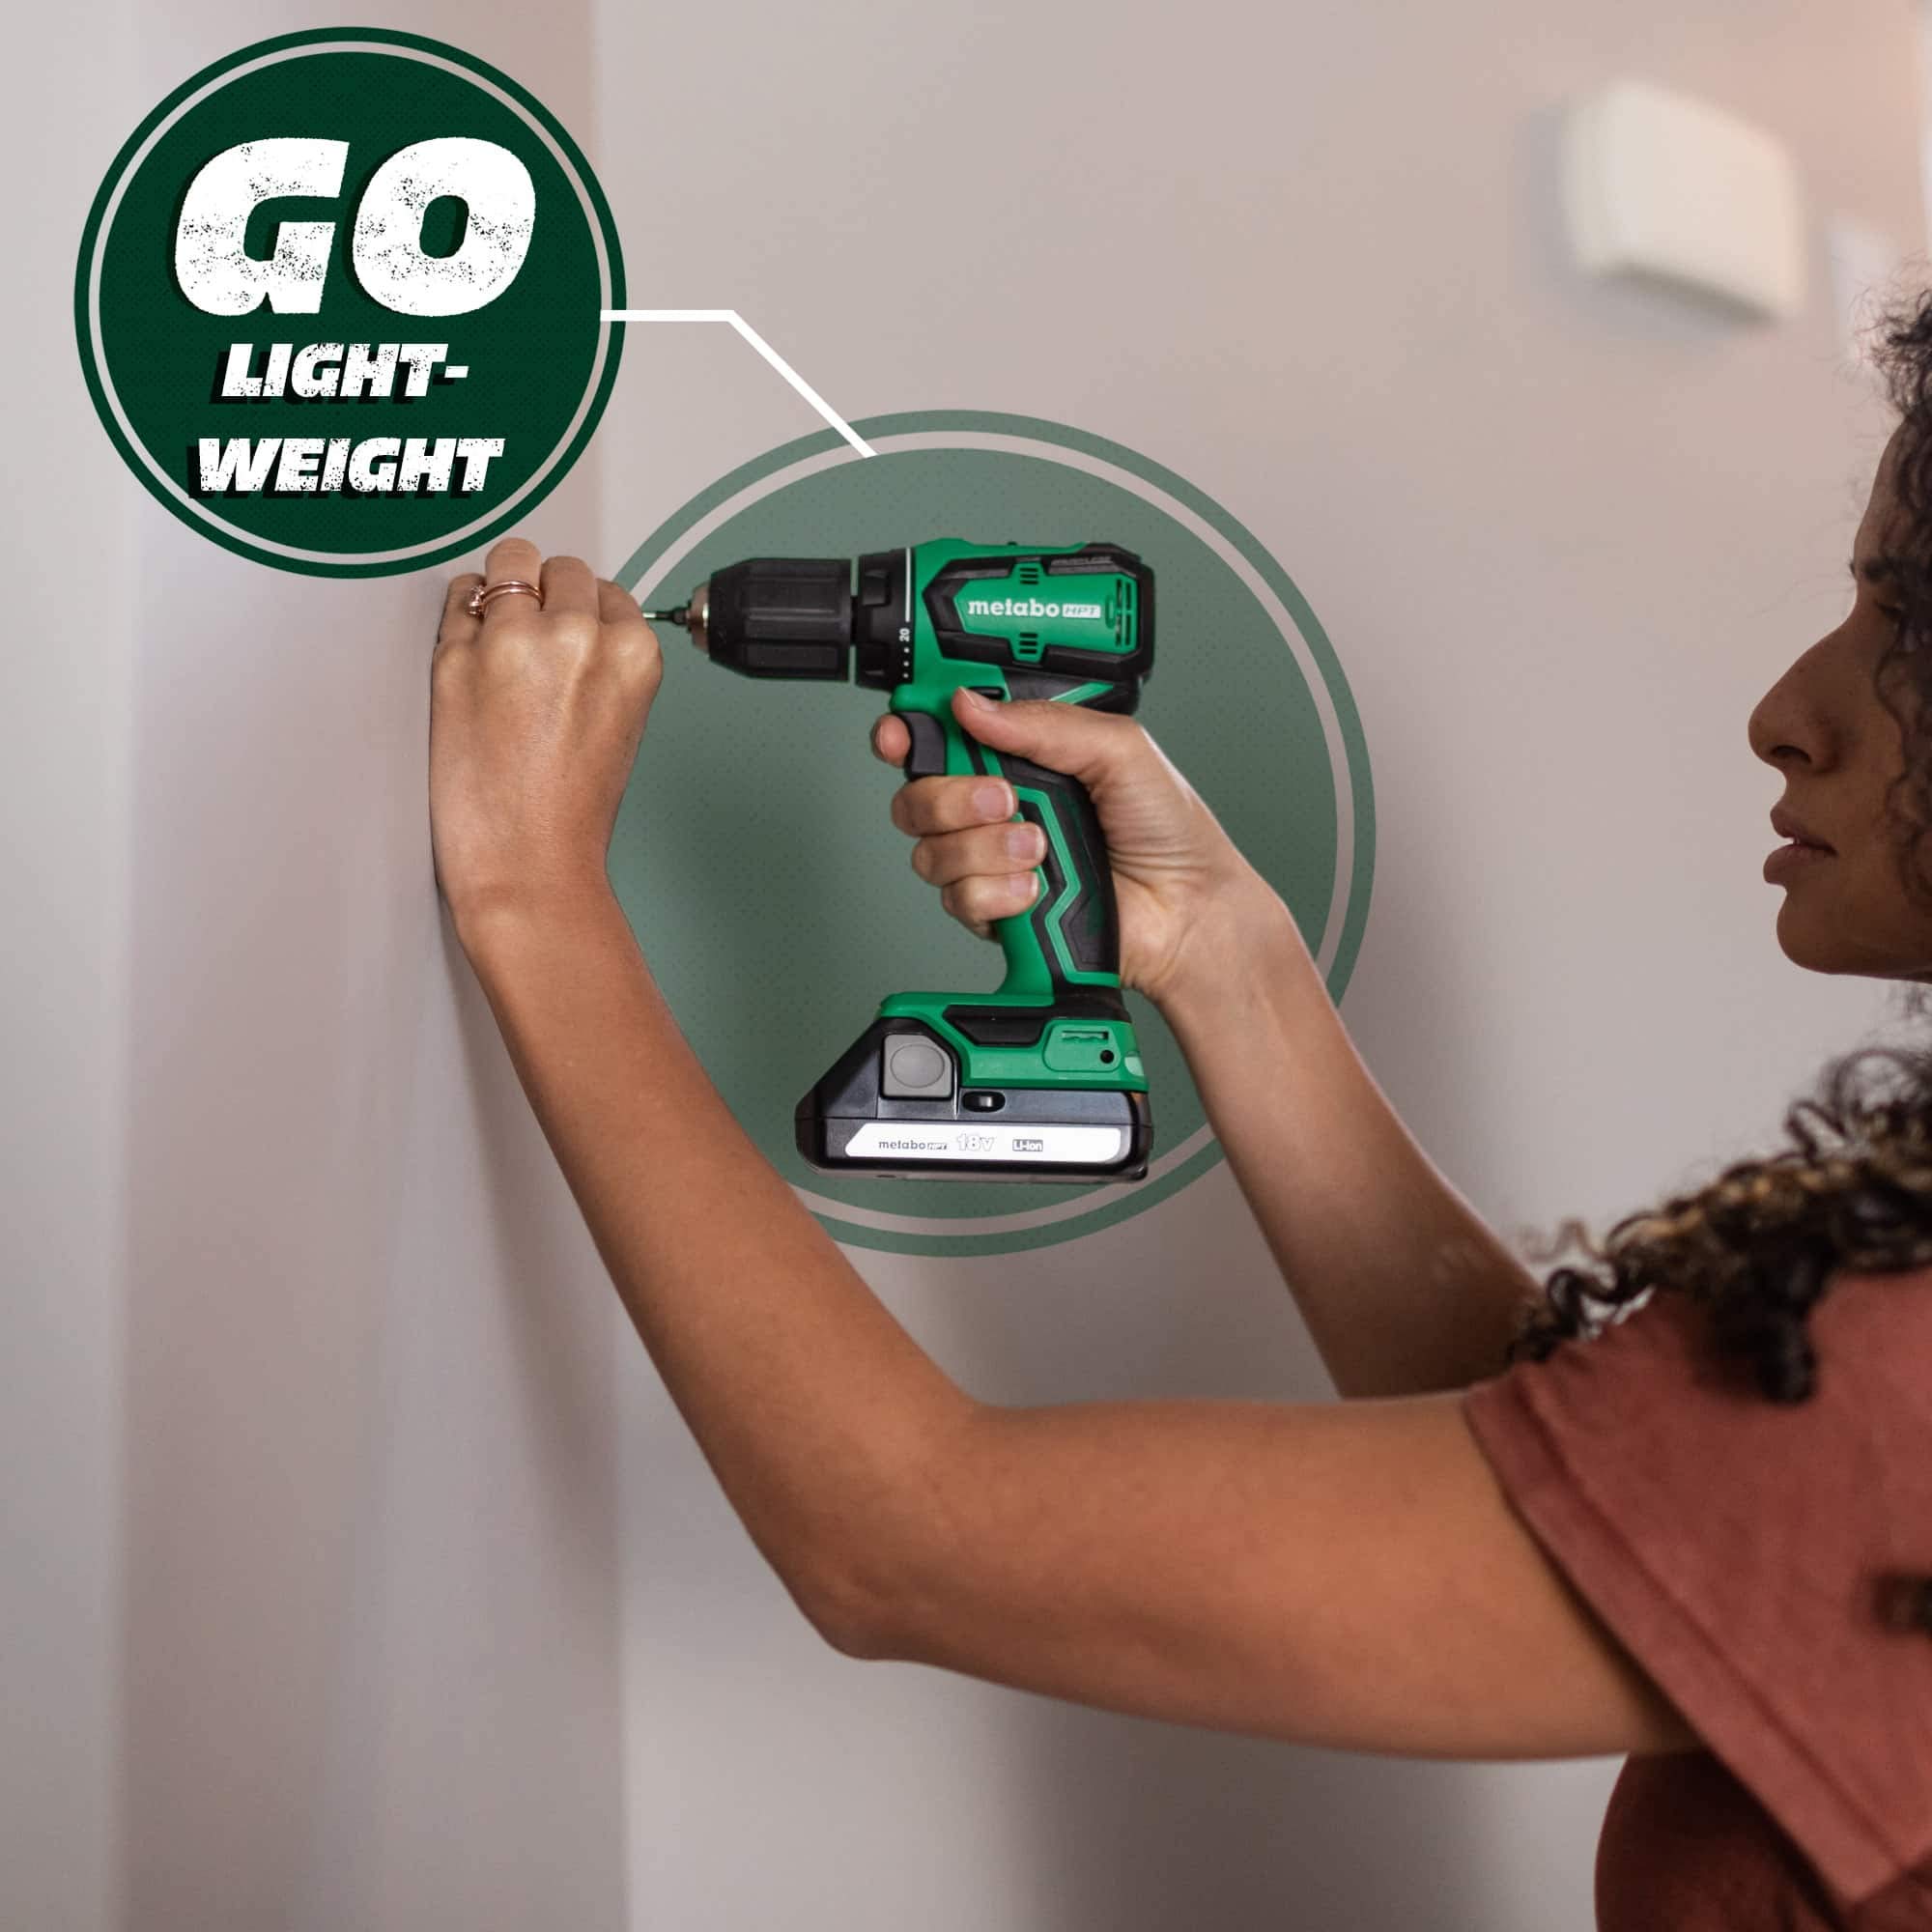 Metabo HPT Cordless Drill | 18V | Sub-Compact | Brushless Motor | Lithium-Ion Batteries | Lifetime Tool Warranty | DS18DDX